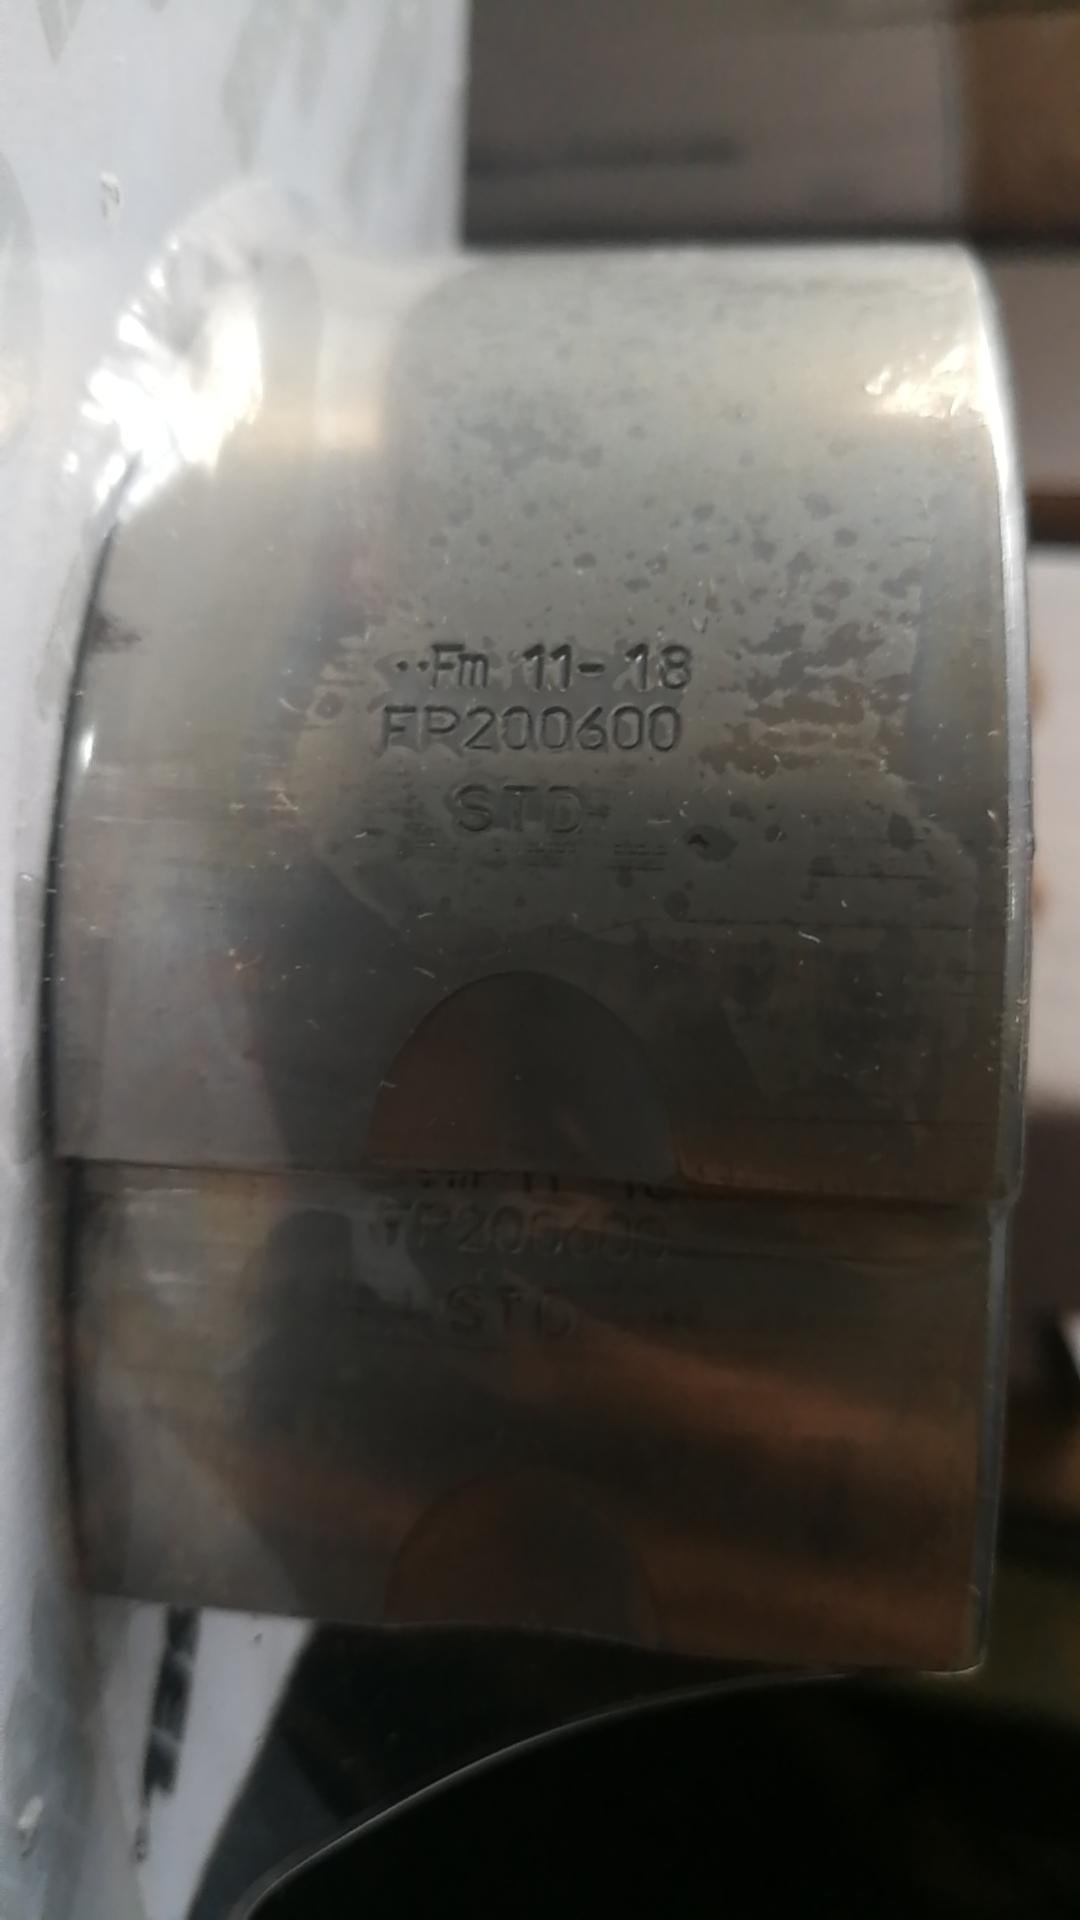 Used in Cummins VT28 engine connecting rod bearing 200600 US FP 2